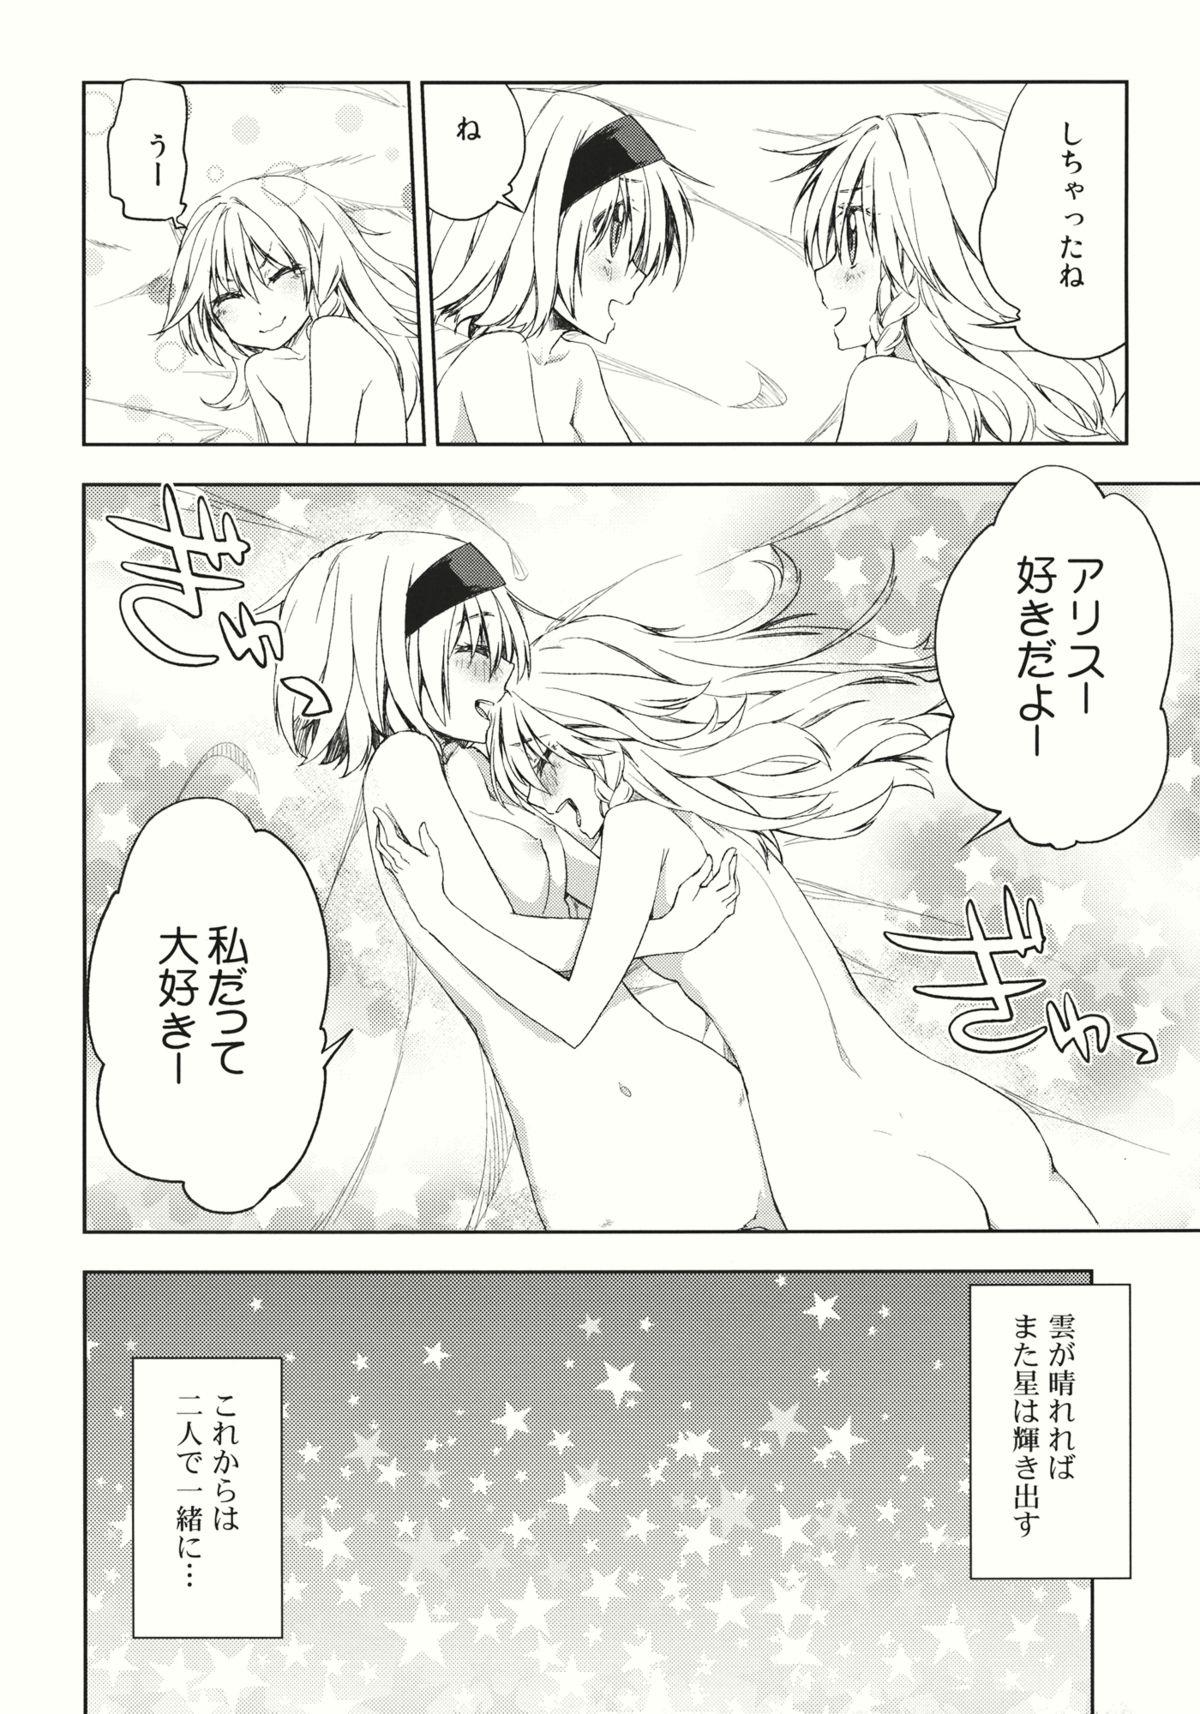 Raw twinkle star - Touhou project Shemales - Page 24